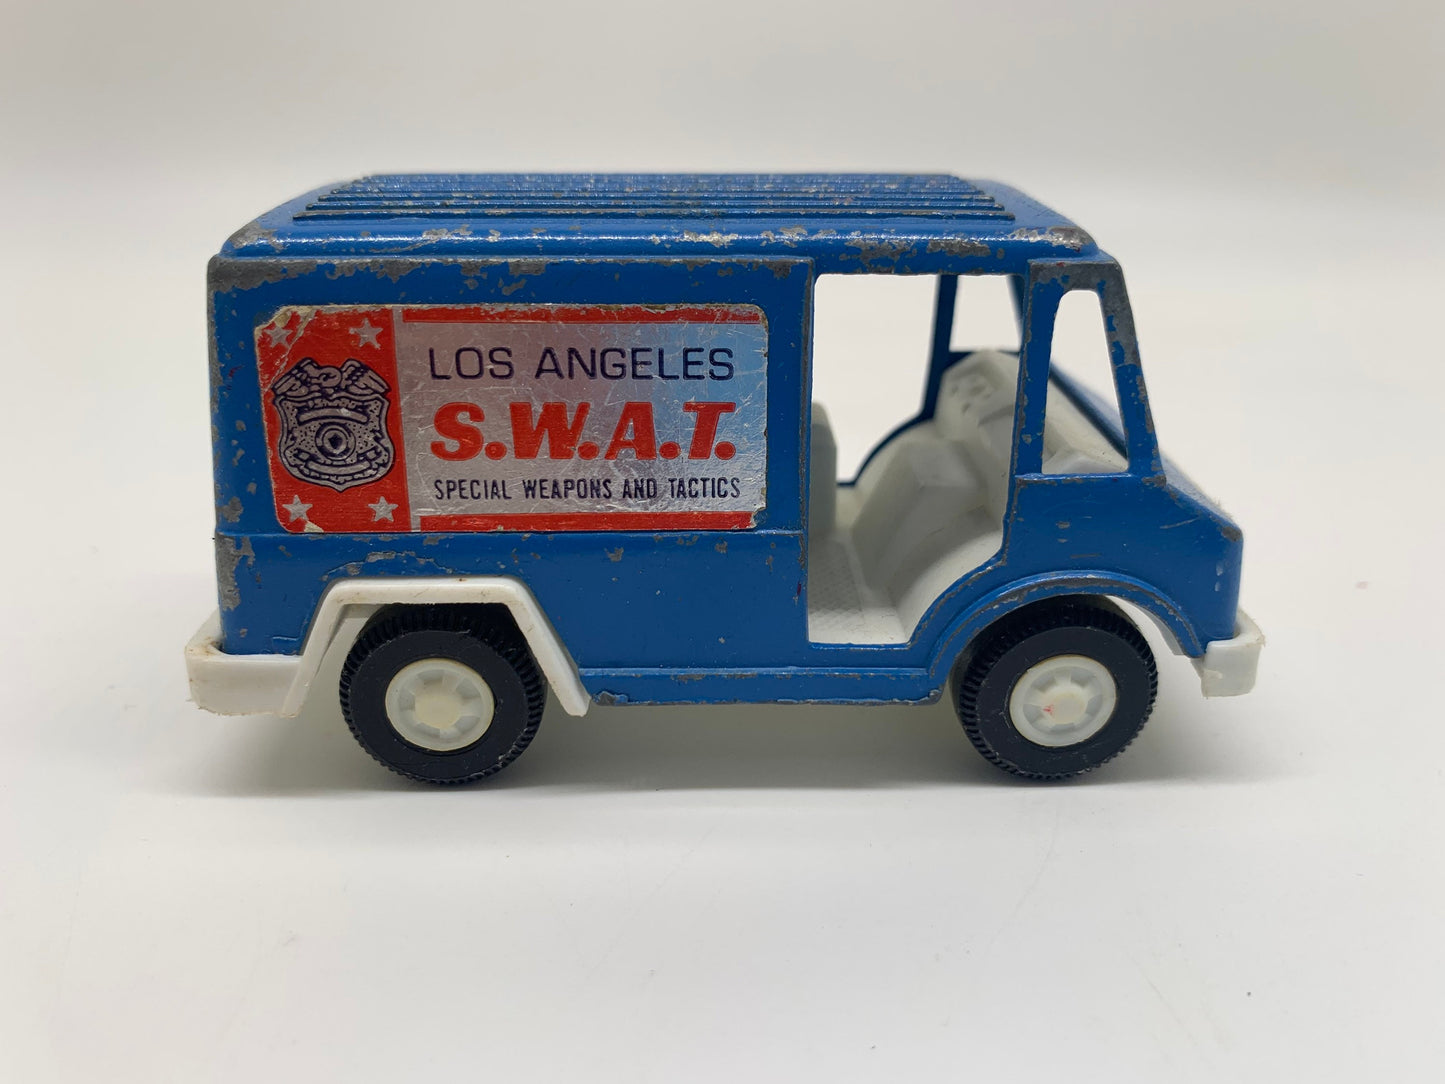 Tootsietoy Los Angeles SWAT Ranel Truck Blue Perfect Birthday Gift Miniature Collectible Scale Model Toy Car